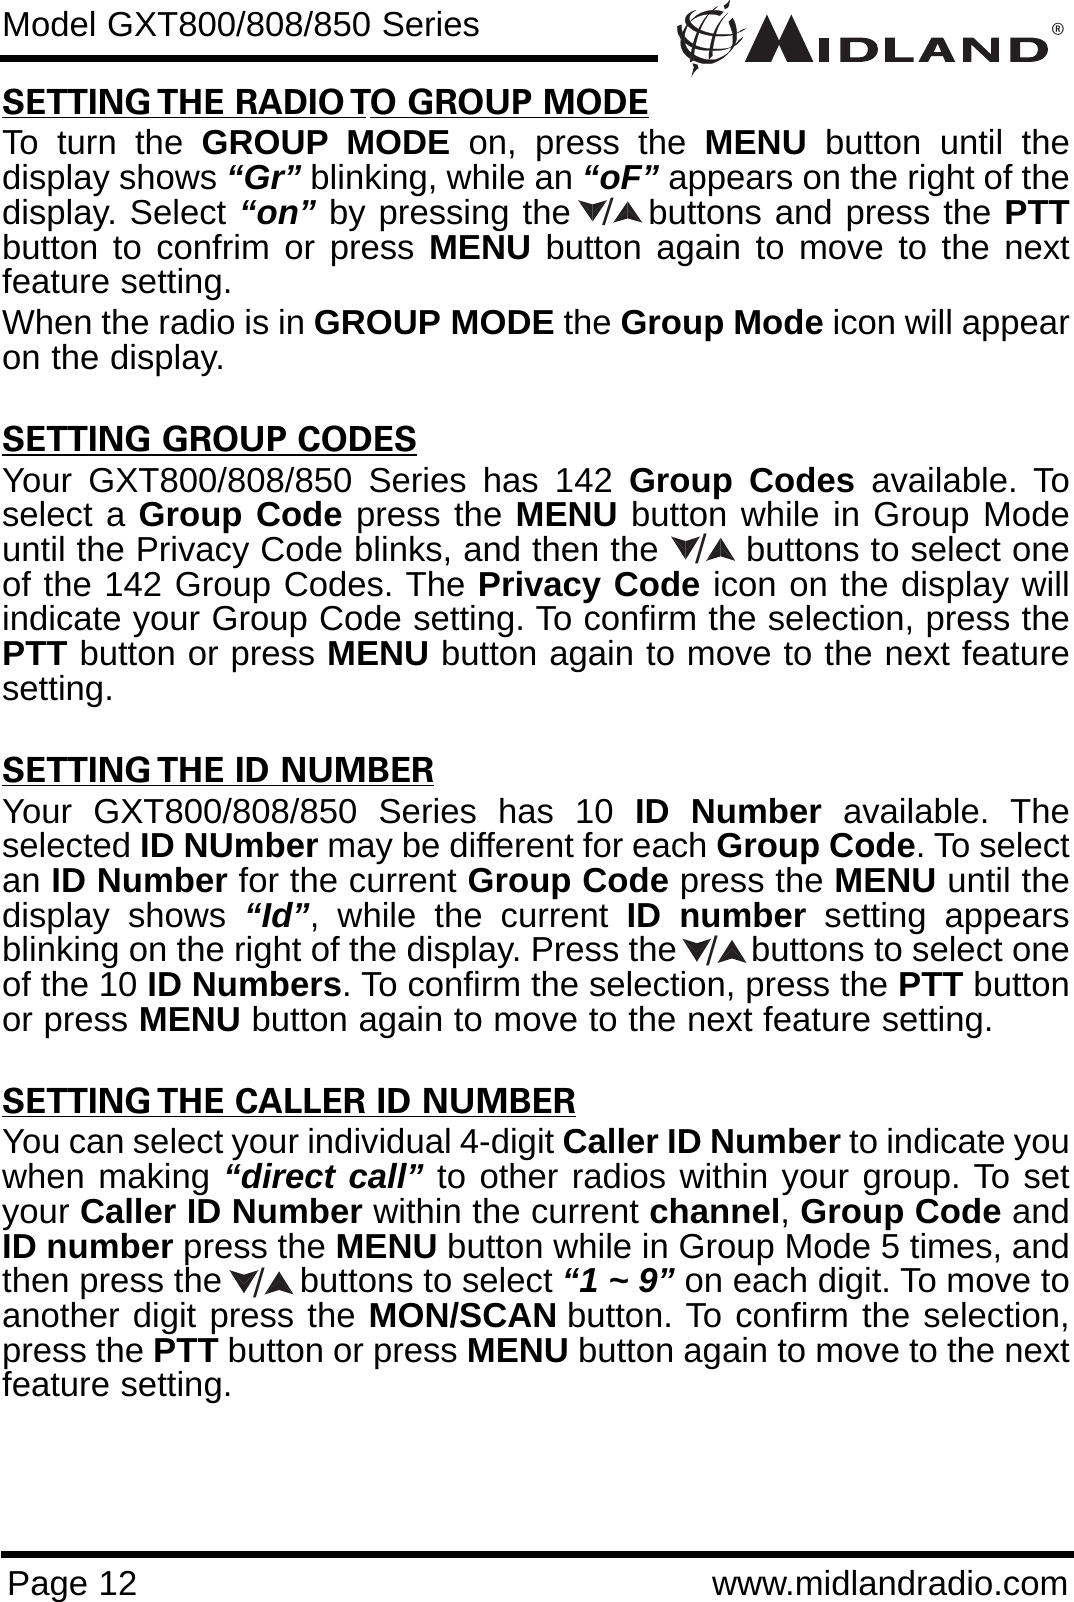 ®Page 12 www.midlandradio.comSETTING THE RADIO TO GROUP MODETo turn the GROUP MODE on, press the MENU button until thedisplay shows “Gr” blinking, while an “oF” appears on the right of thedisplay. Select “on” by pressing the      buttons and press the PTTbutton to confrim or press MENU button again to move to the nextfeature setting. When the radio is in GROUP MODE the Group Mode icon will appearon the display.SETTING GROUP CODESYour GXT800/808/850 Series has 142 Group Codes available. Toselect a Group Code press the MENU button while in Group Modeuntil the Privacy Code blinks, and then the        buttons to select oneof the 142 Group Codes. The Privacy Code icon on the display willindicate your Group Code setting. To confirm the selection, press thePTT button or press MENU button again to move to the next featuresetting.SETTING THE ID NUMBERYour GXT800/808/850 Series has 10 ID Number available. Theselected ID NUmber may be different for each Group Code. To selectan ID Number for the current Group Code press the MENU until thedisplay shows “Id”, while the current ID number setting appearsblinking on the right of the display. Press the        buttons to select oneof the 10 ID Numbers. To confirm the selection, press the PTT buttonor press MENU button again to move to the next feature setting.SETTING THE CALLER ID NUMBERYou can select your individual 4-digit Caller ID Number to indicate youwhen making “direct call” to other radios within your group. To setyour Caller ID Number within the current channel, Group Code andID number press the MENU button while in Group Mode 5 times, andthen press the        buttons to select “1 ~ 9” on each digit. To move toanother digit press the MON/SCAN button. To confirm the selection,press the PTT button or press MENU button again to move to the nextfeature setting. Model GXT800/808/850 Series////